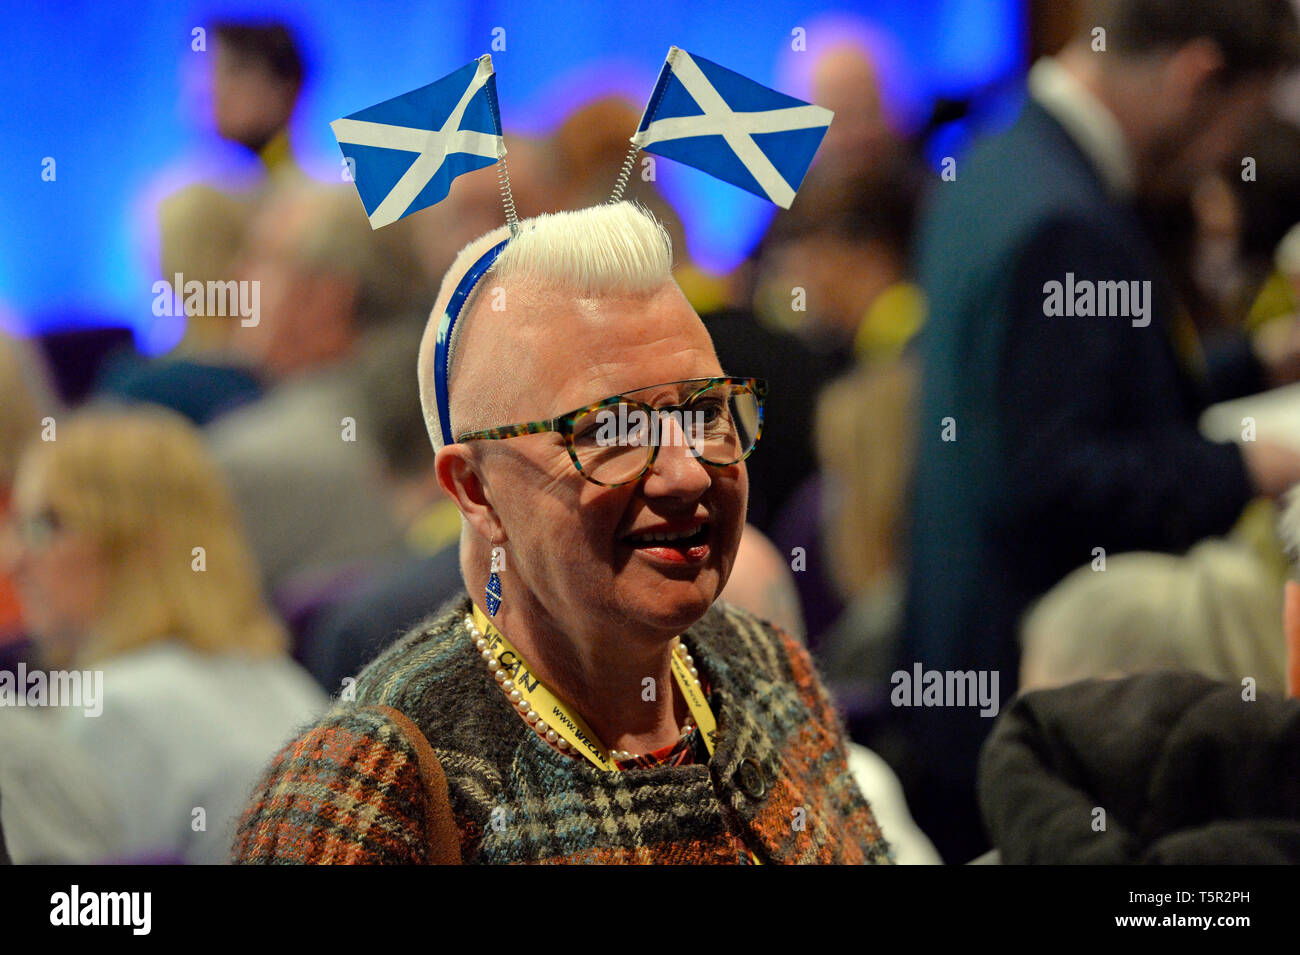 Edinburgh, Scotland, United Kingdom. 27th Apr, 2019. A delegate in colourful in the auditorium at the Scottish National Party's Spring Conference in the Edinburgh International Conference Centre. Credit: Ken Jack/Alamy Live News Stock Photo